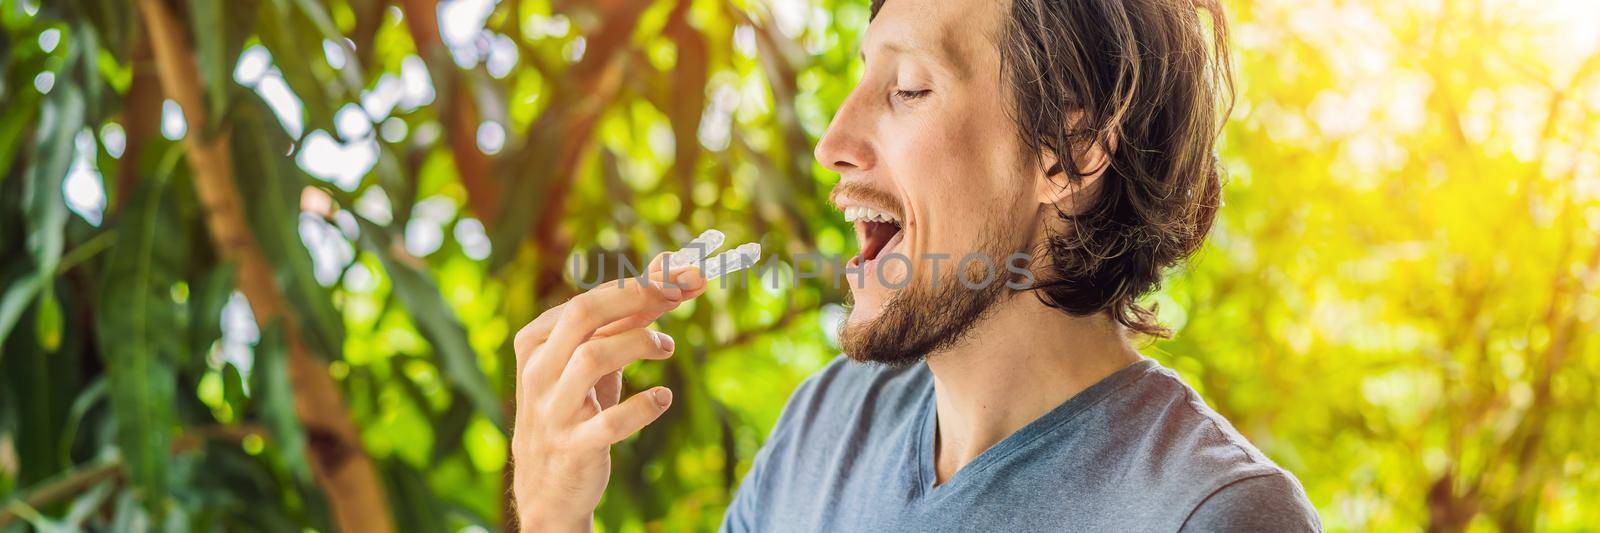 Man placing a bite plate in his mouth to protect his teeth at night from grinding caused by bruxism BANNER, LONG FORMAT by galitskaya